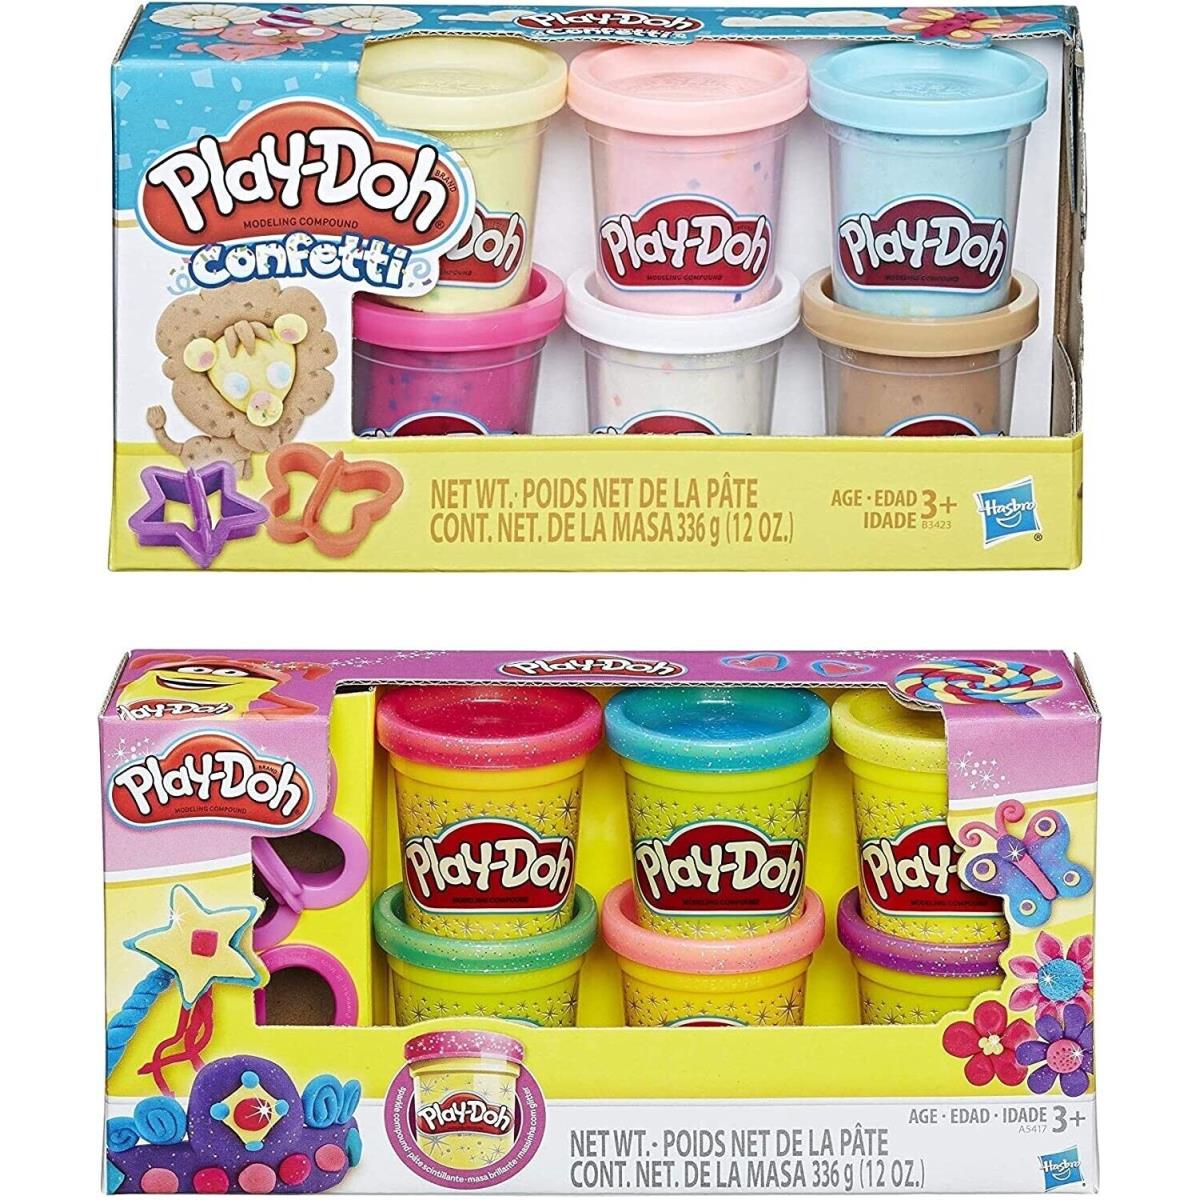 Play-doh Set of 2 Confetti and Sparkle Compound Collections